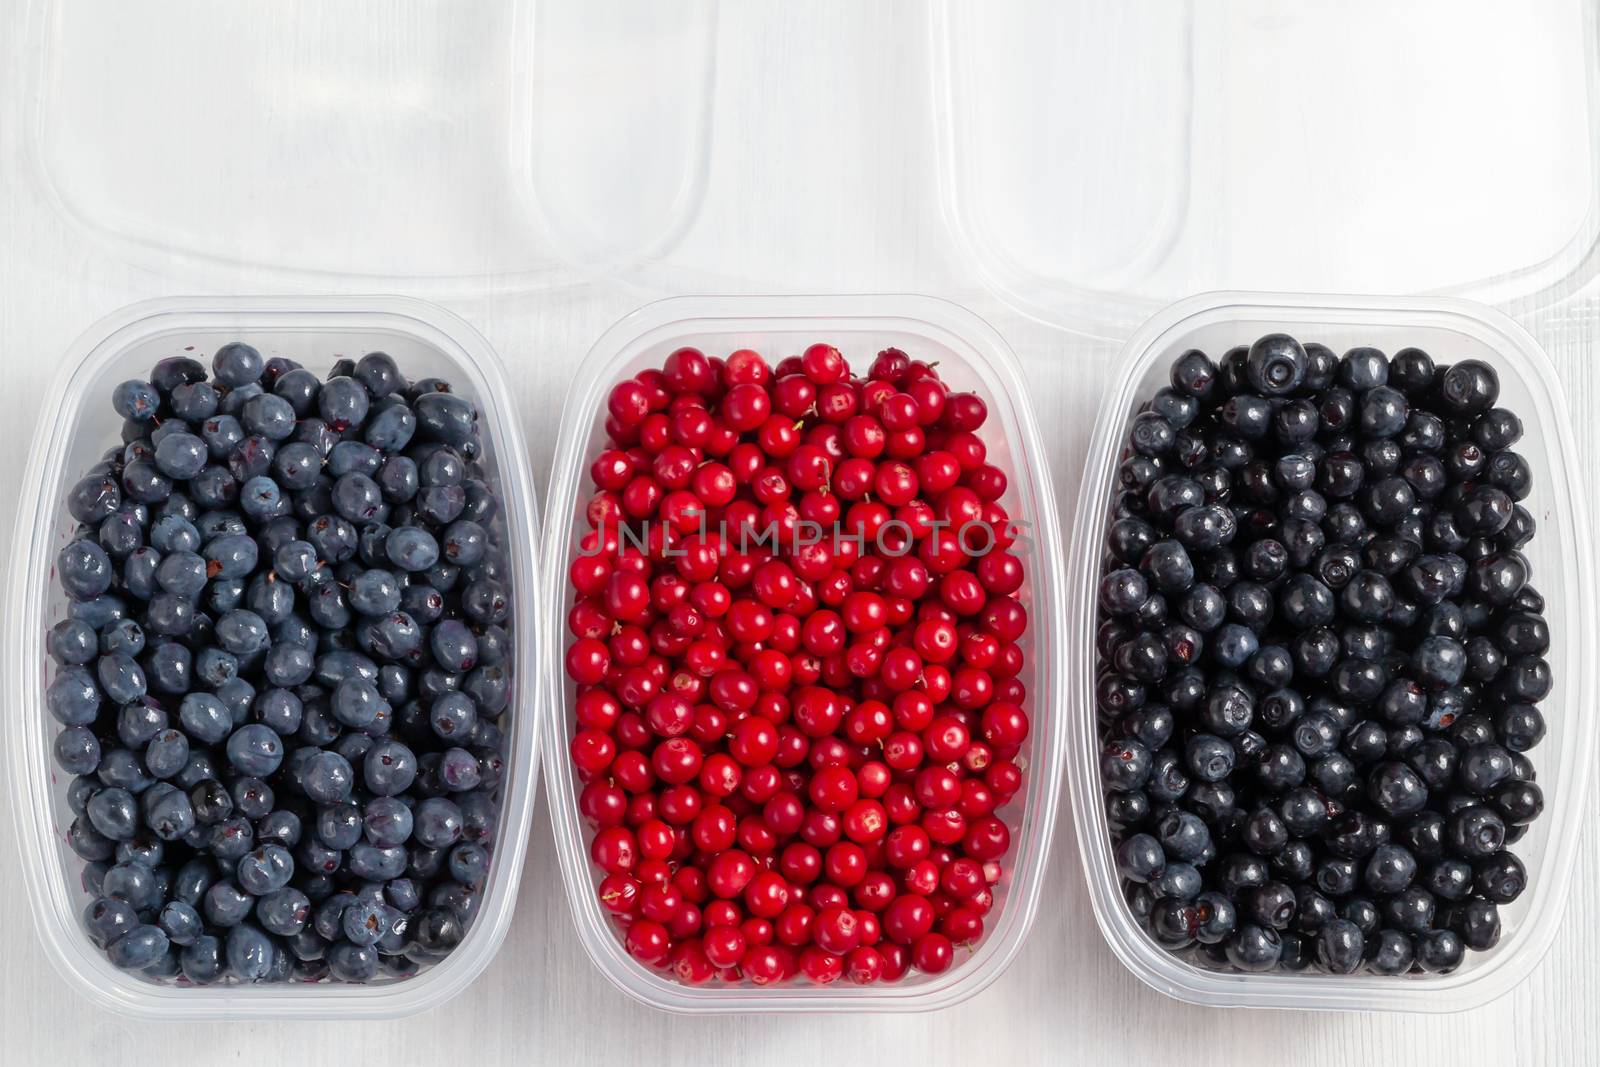 Berries laid out in containers and prepared for freezing and storage, top view.